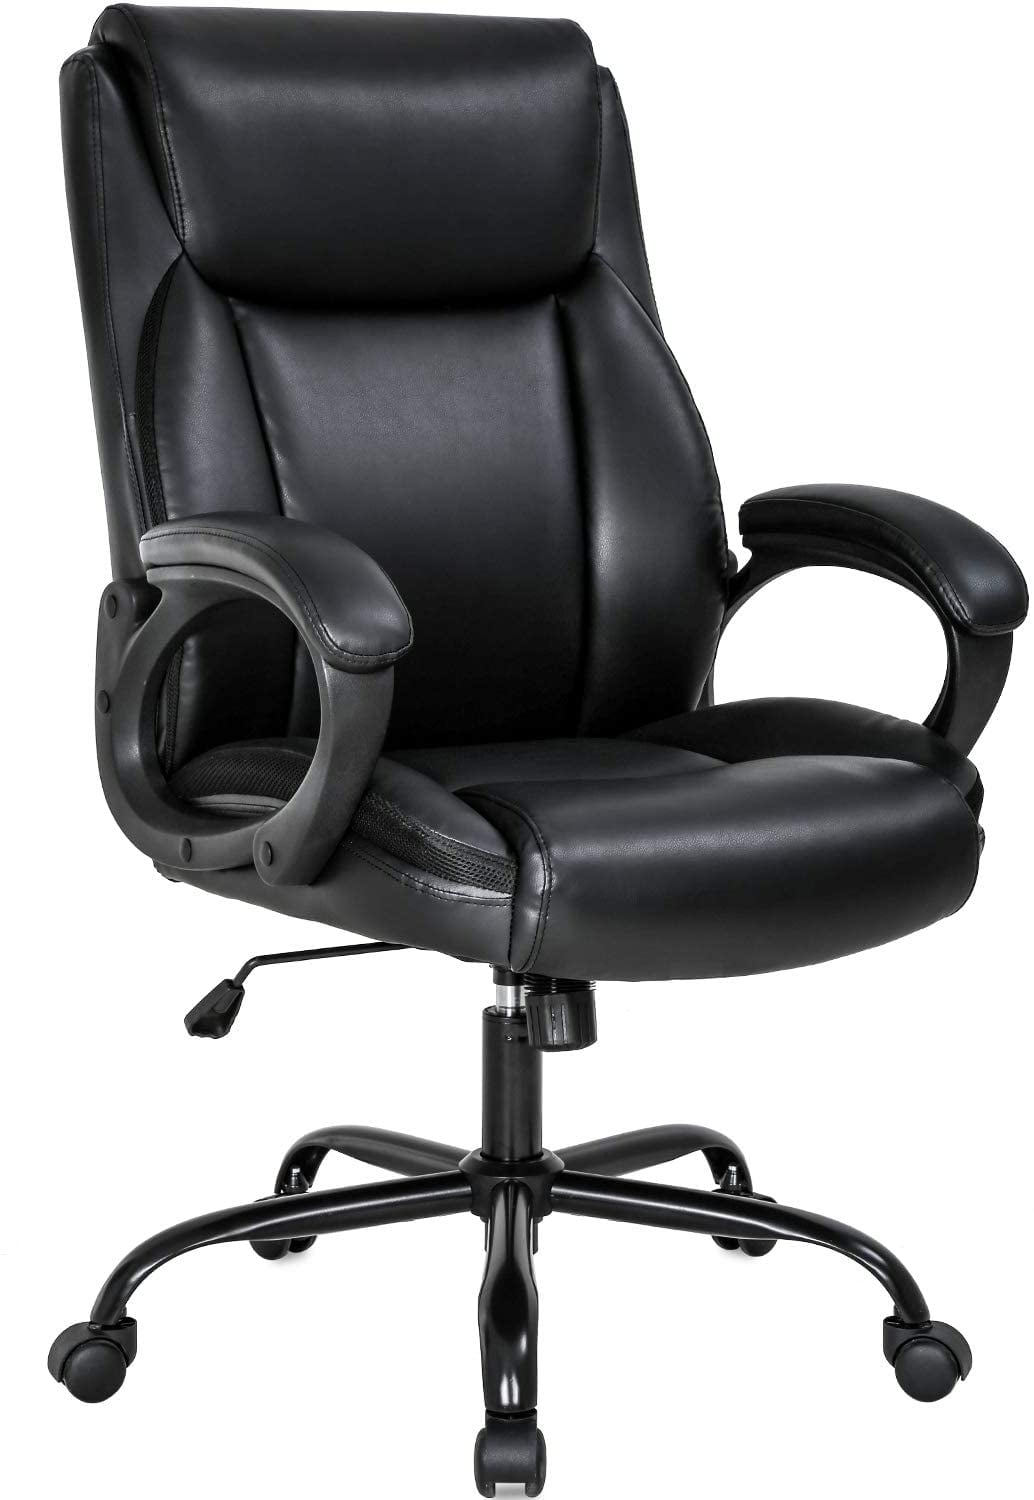 Details about   Ergonomic EAMS Office Chair Executive PU Leather Mid Back Computer Desk Task US 